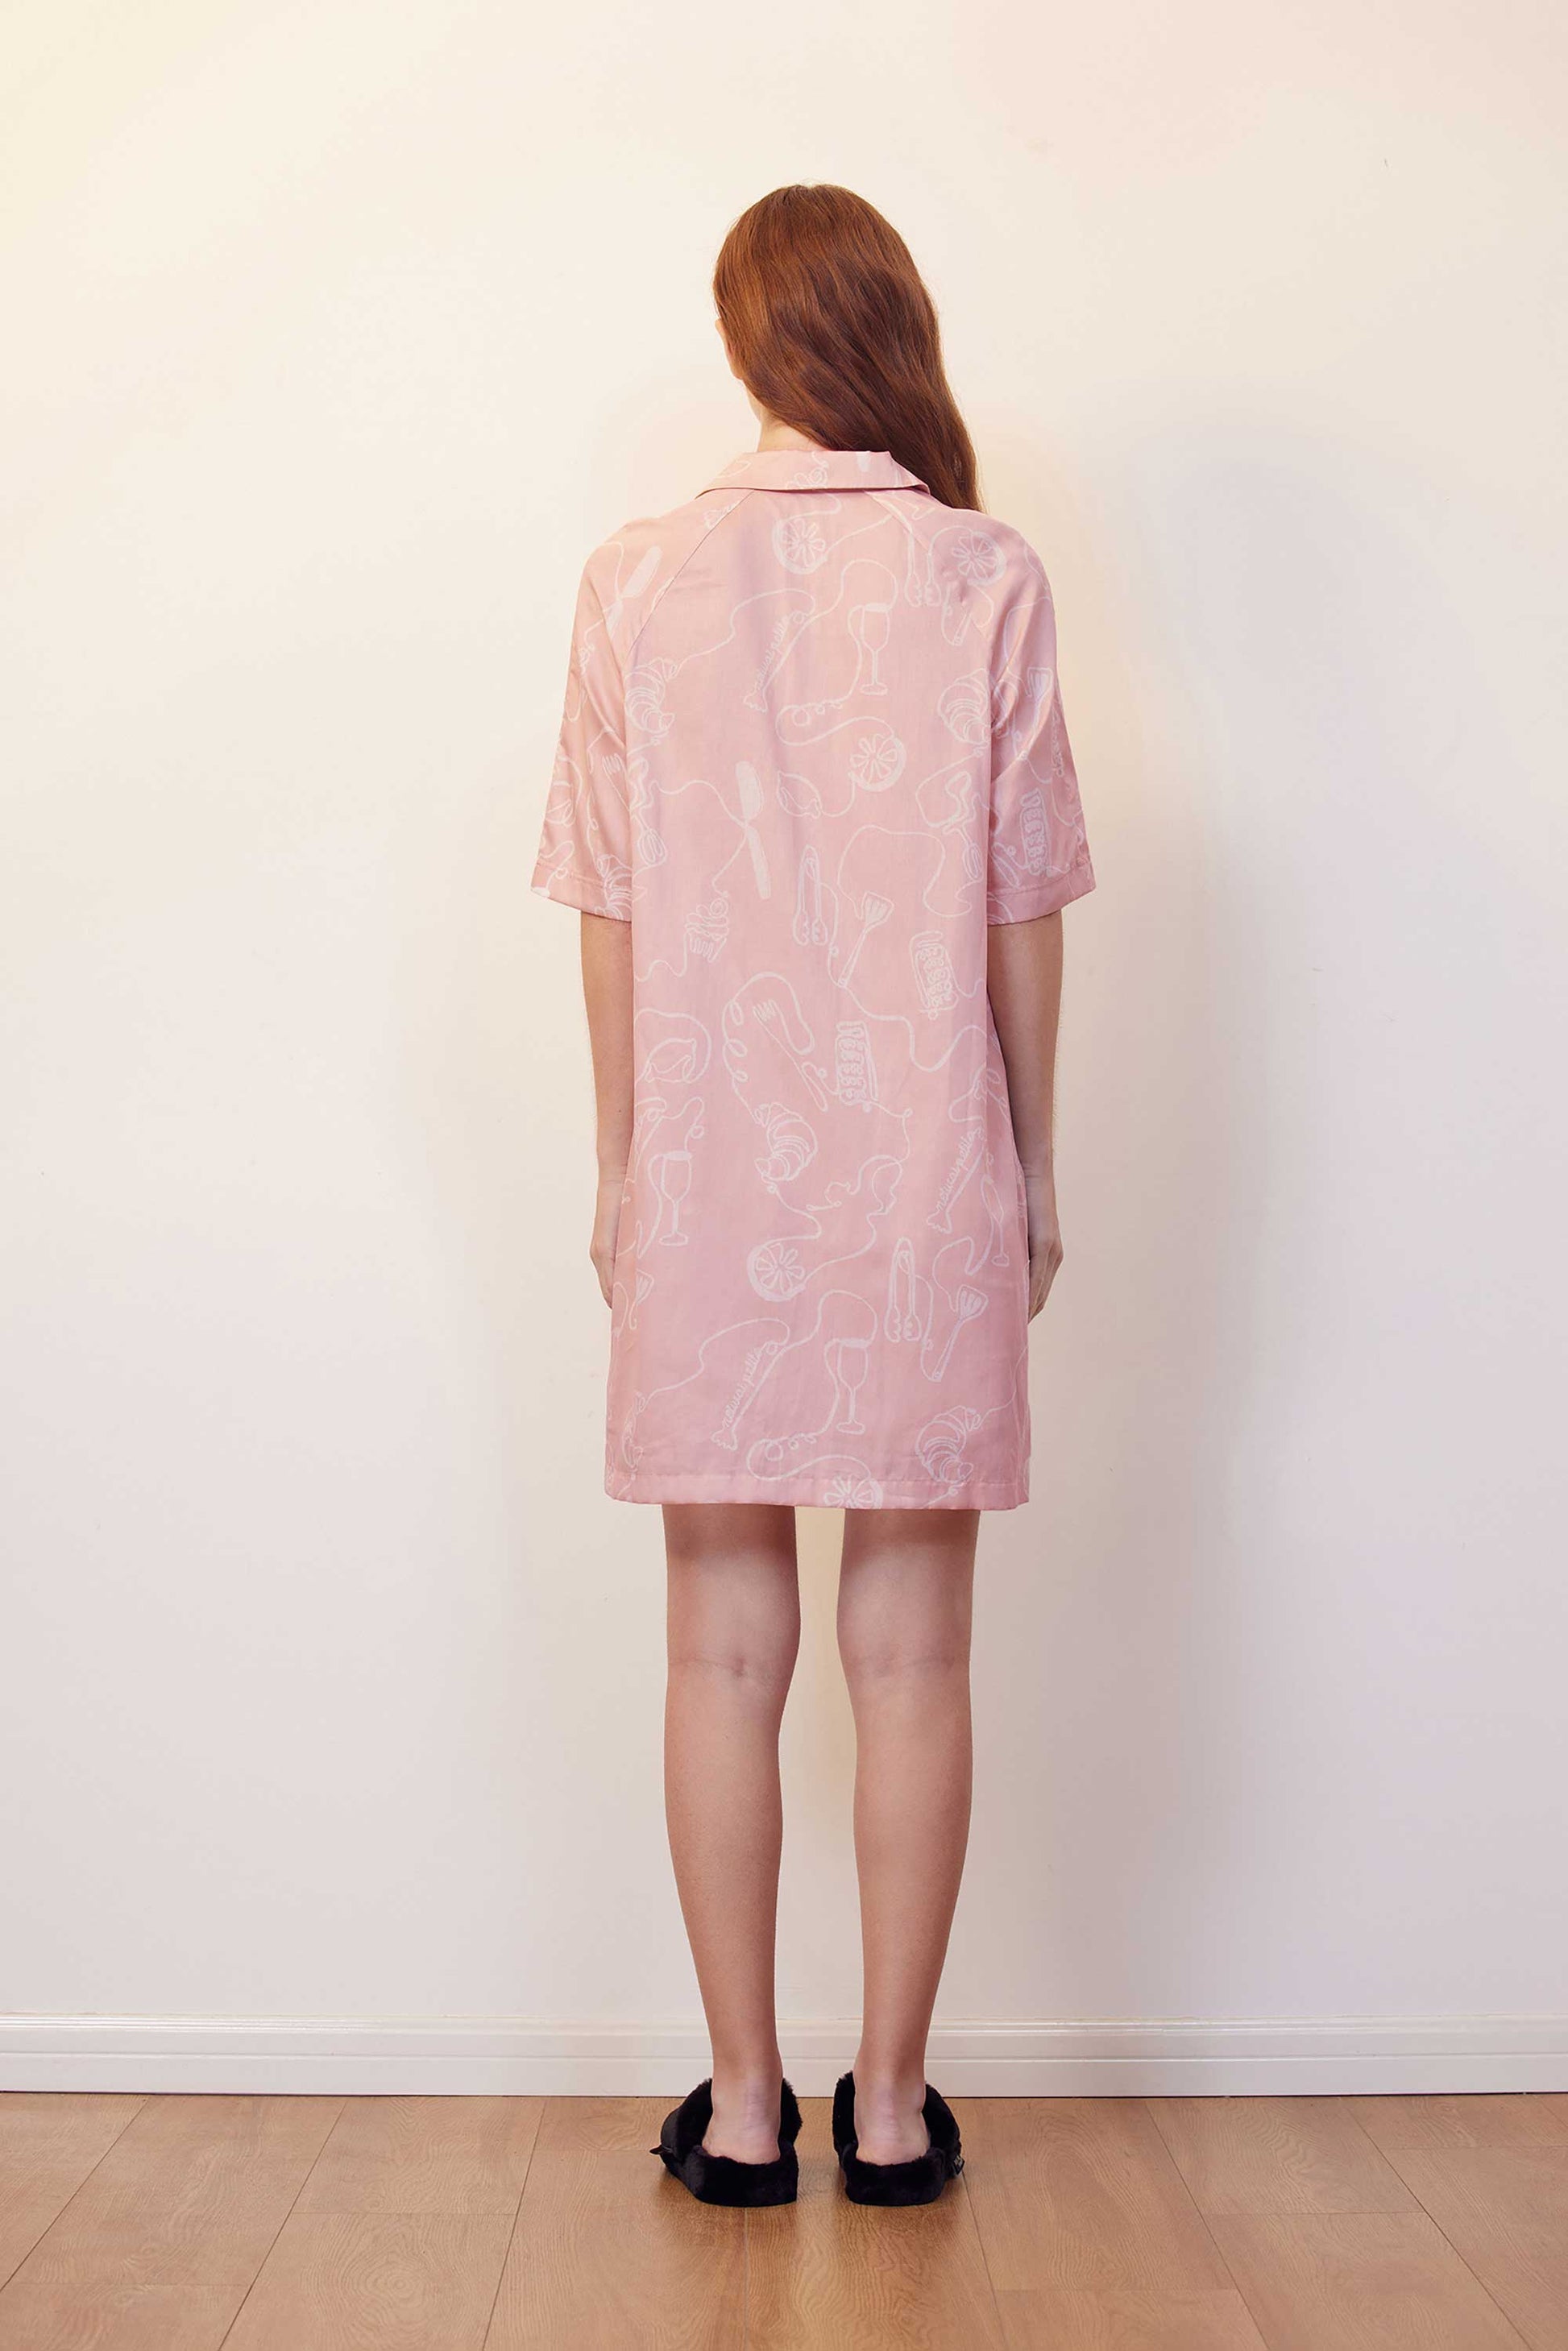 back of woman with pink pajama dress with white sketches